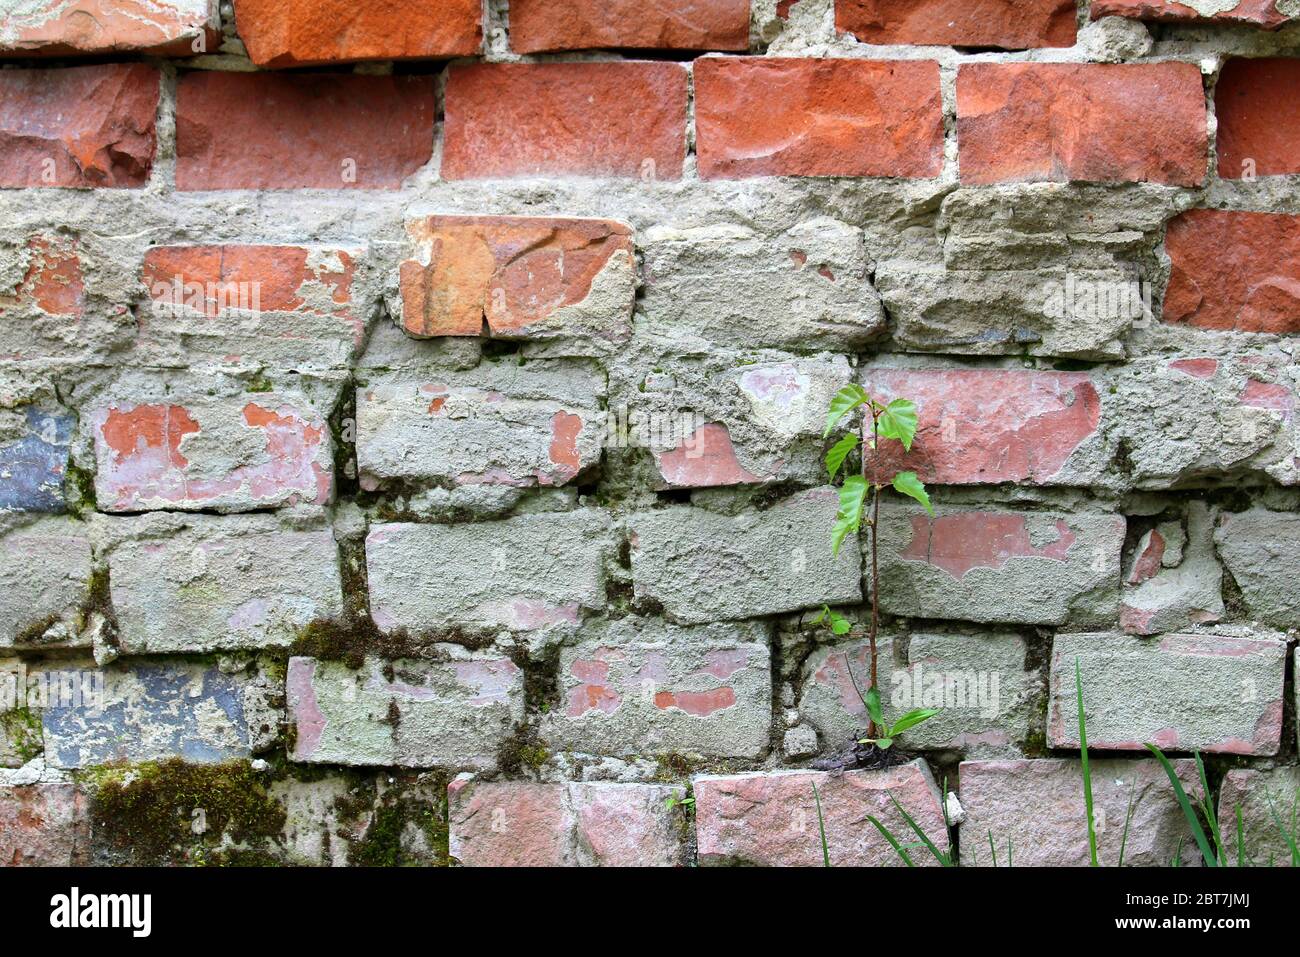 Old cracked brick wall with cracks and hollows. Grunge stylish background with grungy texture. Stock photo for web and print with empty space for text and design Stock Photo